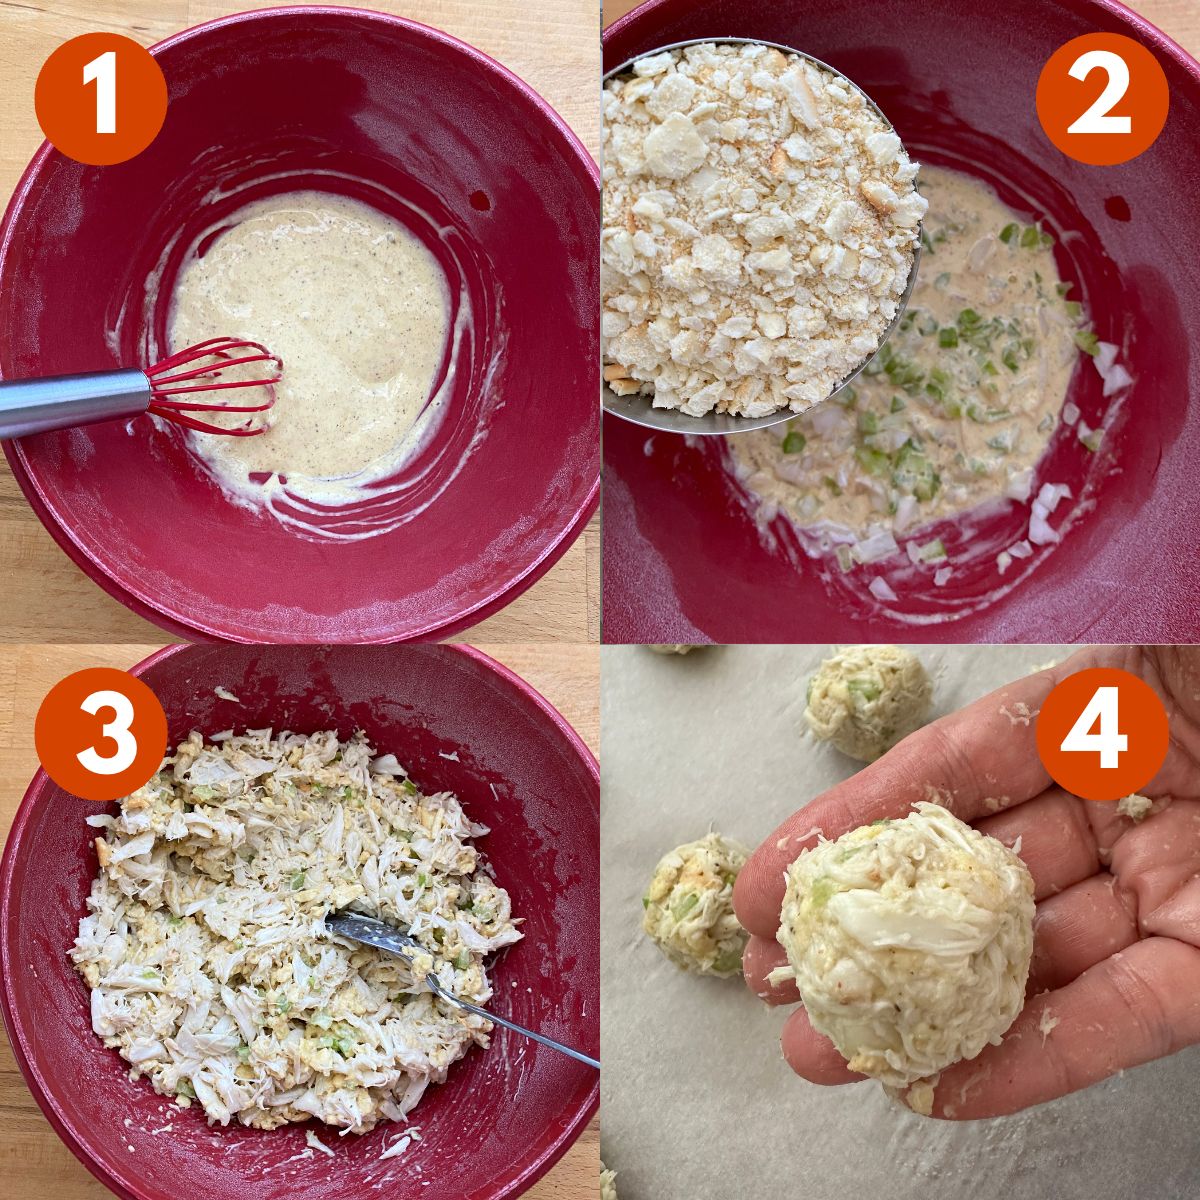 Collage of directions to make crab balls: 1) wet ingredients in bowl 2) crushed saltines being added to bowl with wet ingredients plus celery and onion, 3) crab mixture, 4) hand holding ball of crab mixture.